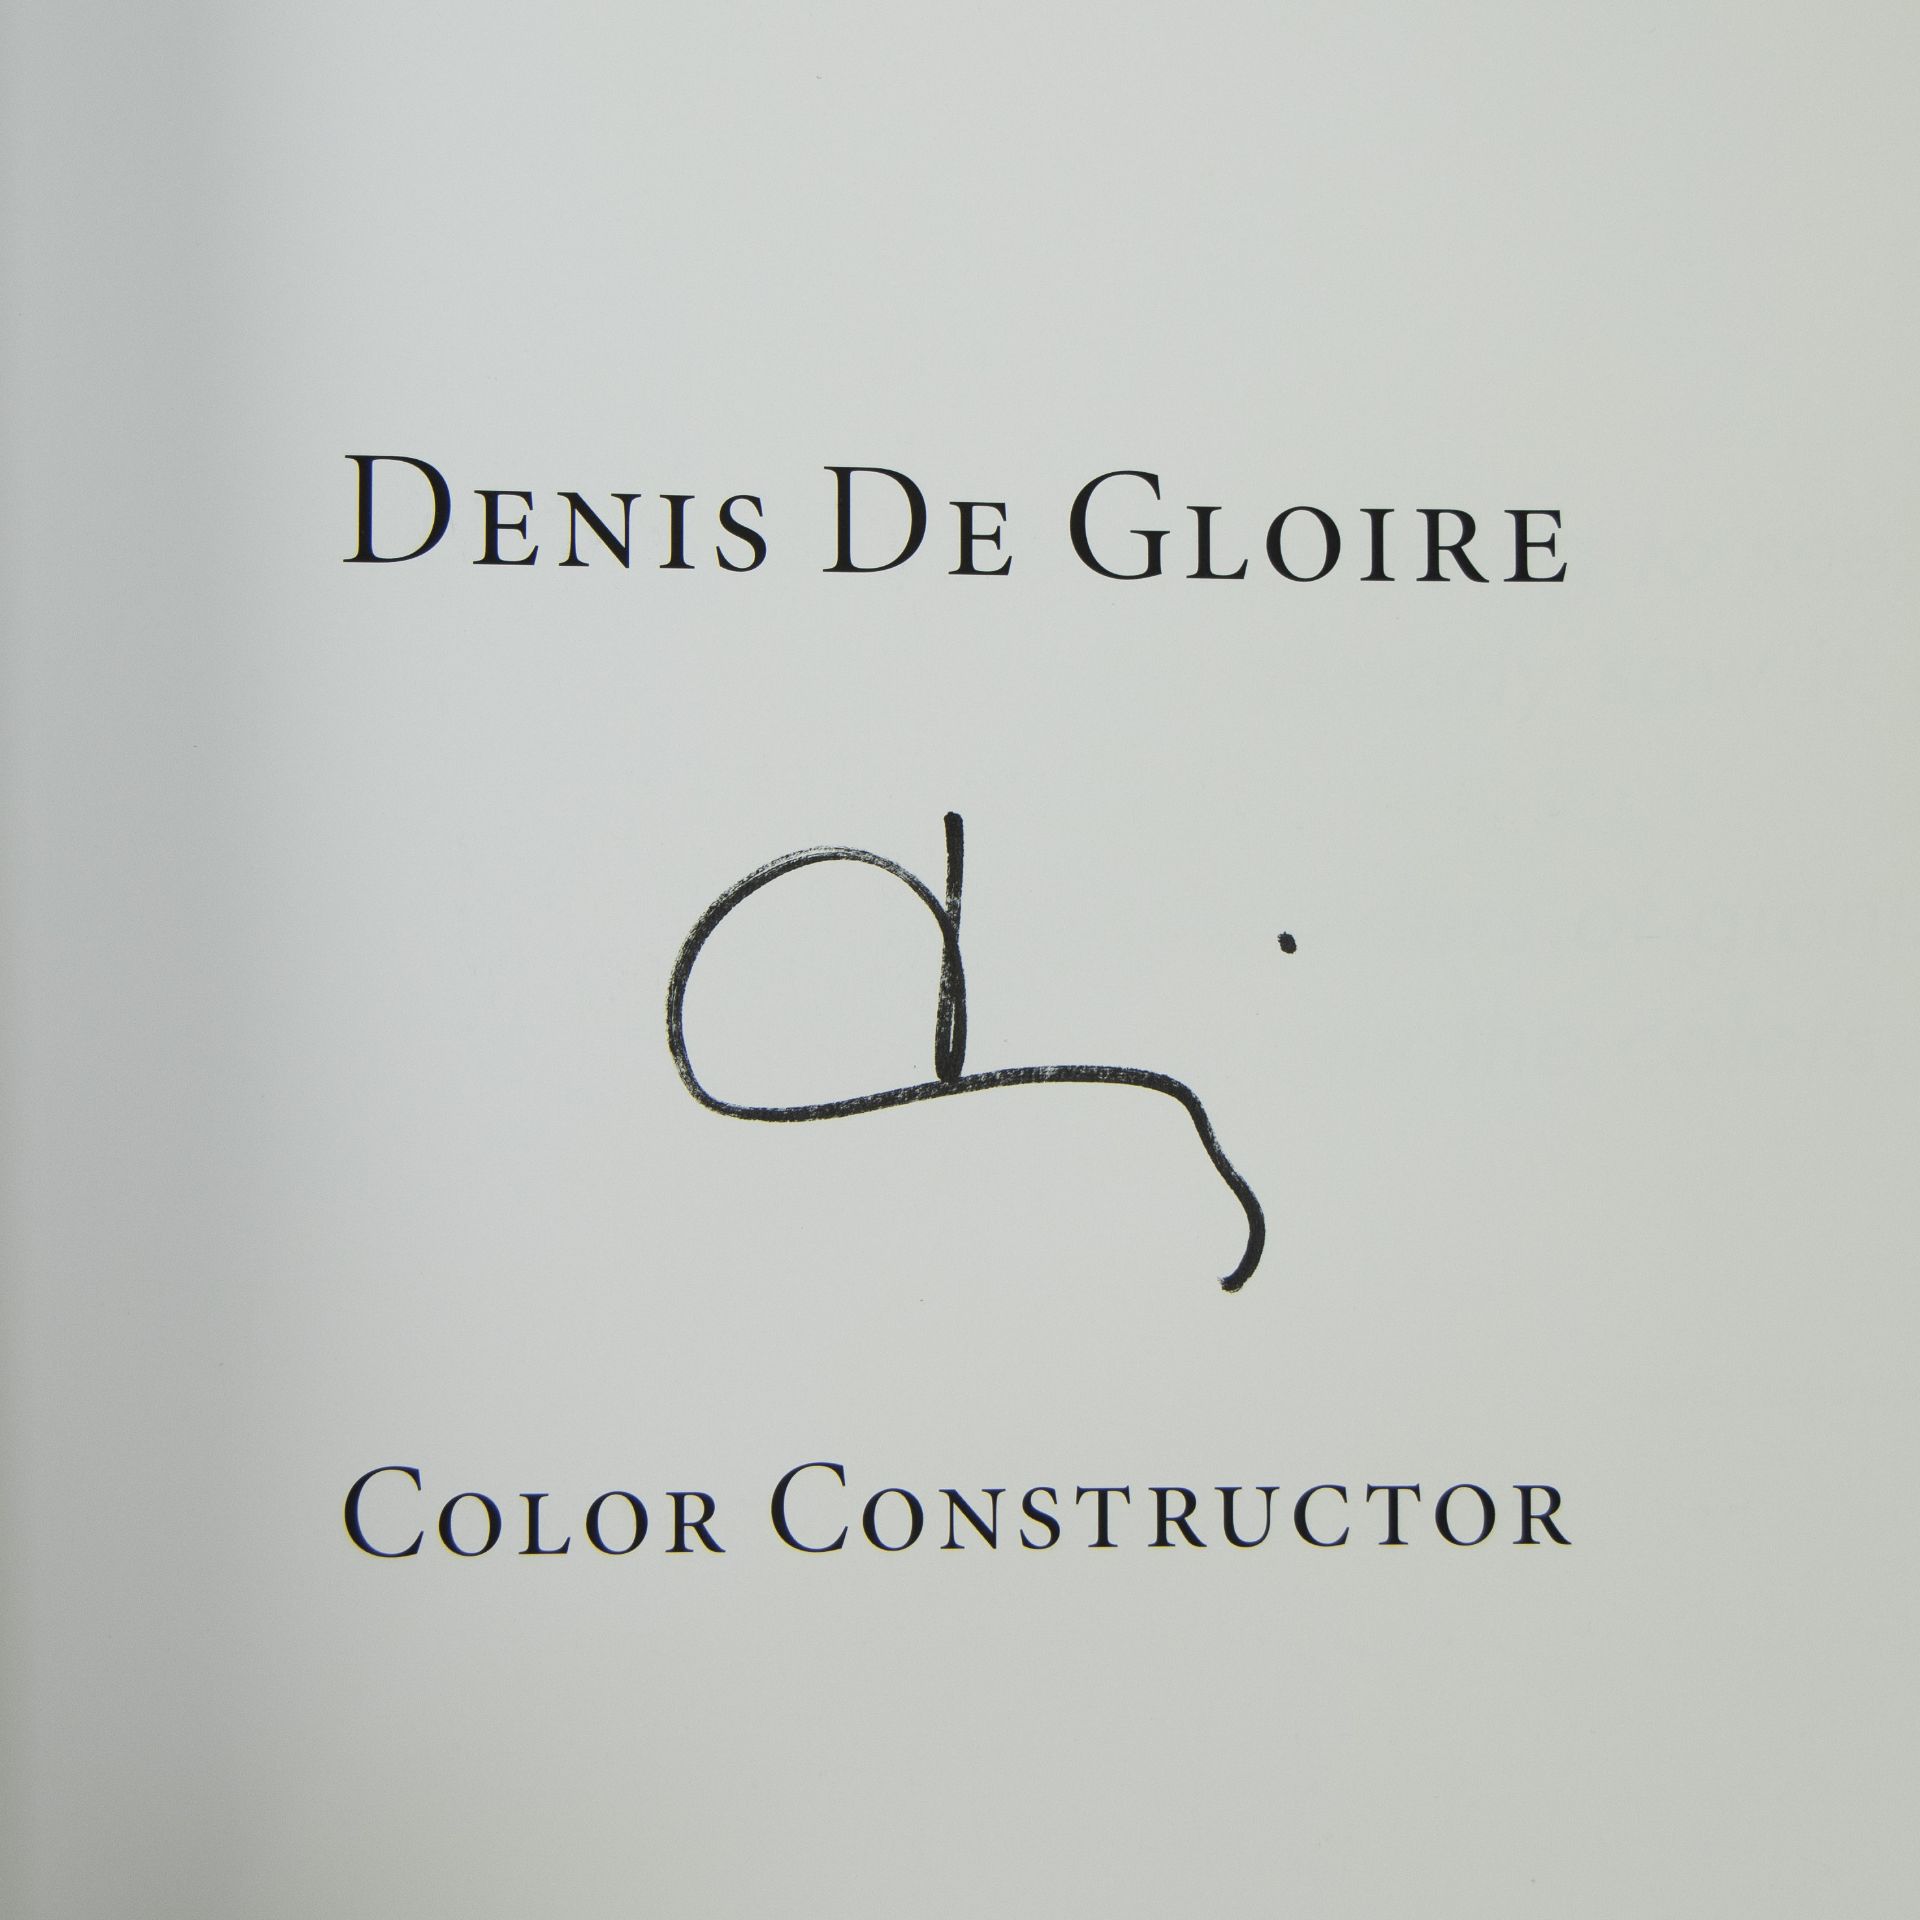 Denis DE GLOIRE (1959), book Color Constructor with painted cover (on canvas), signed and dated 2015 - Image 3 of 5